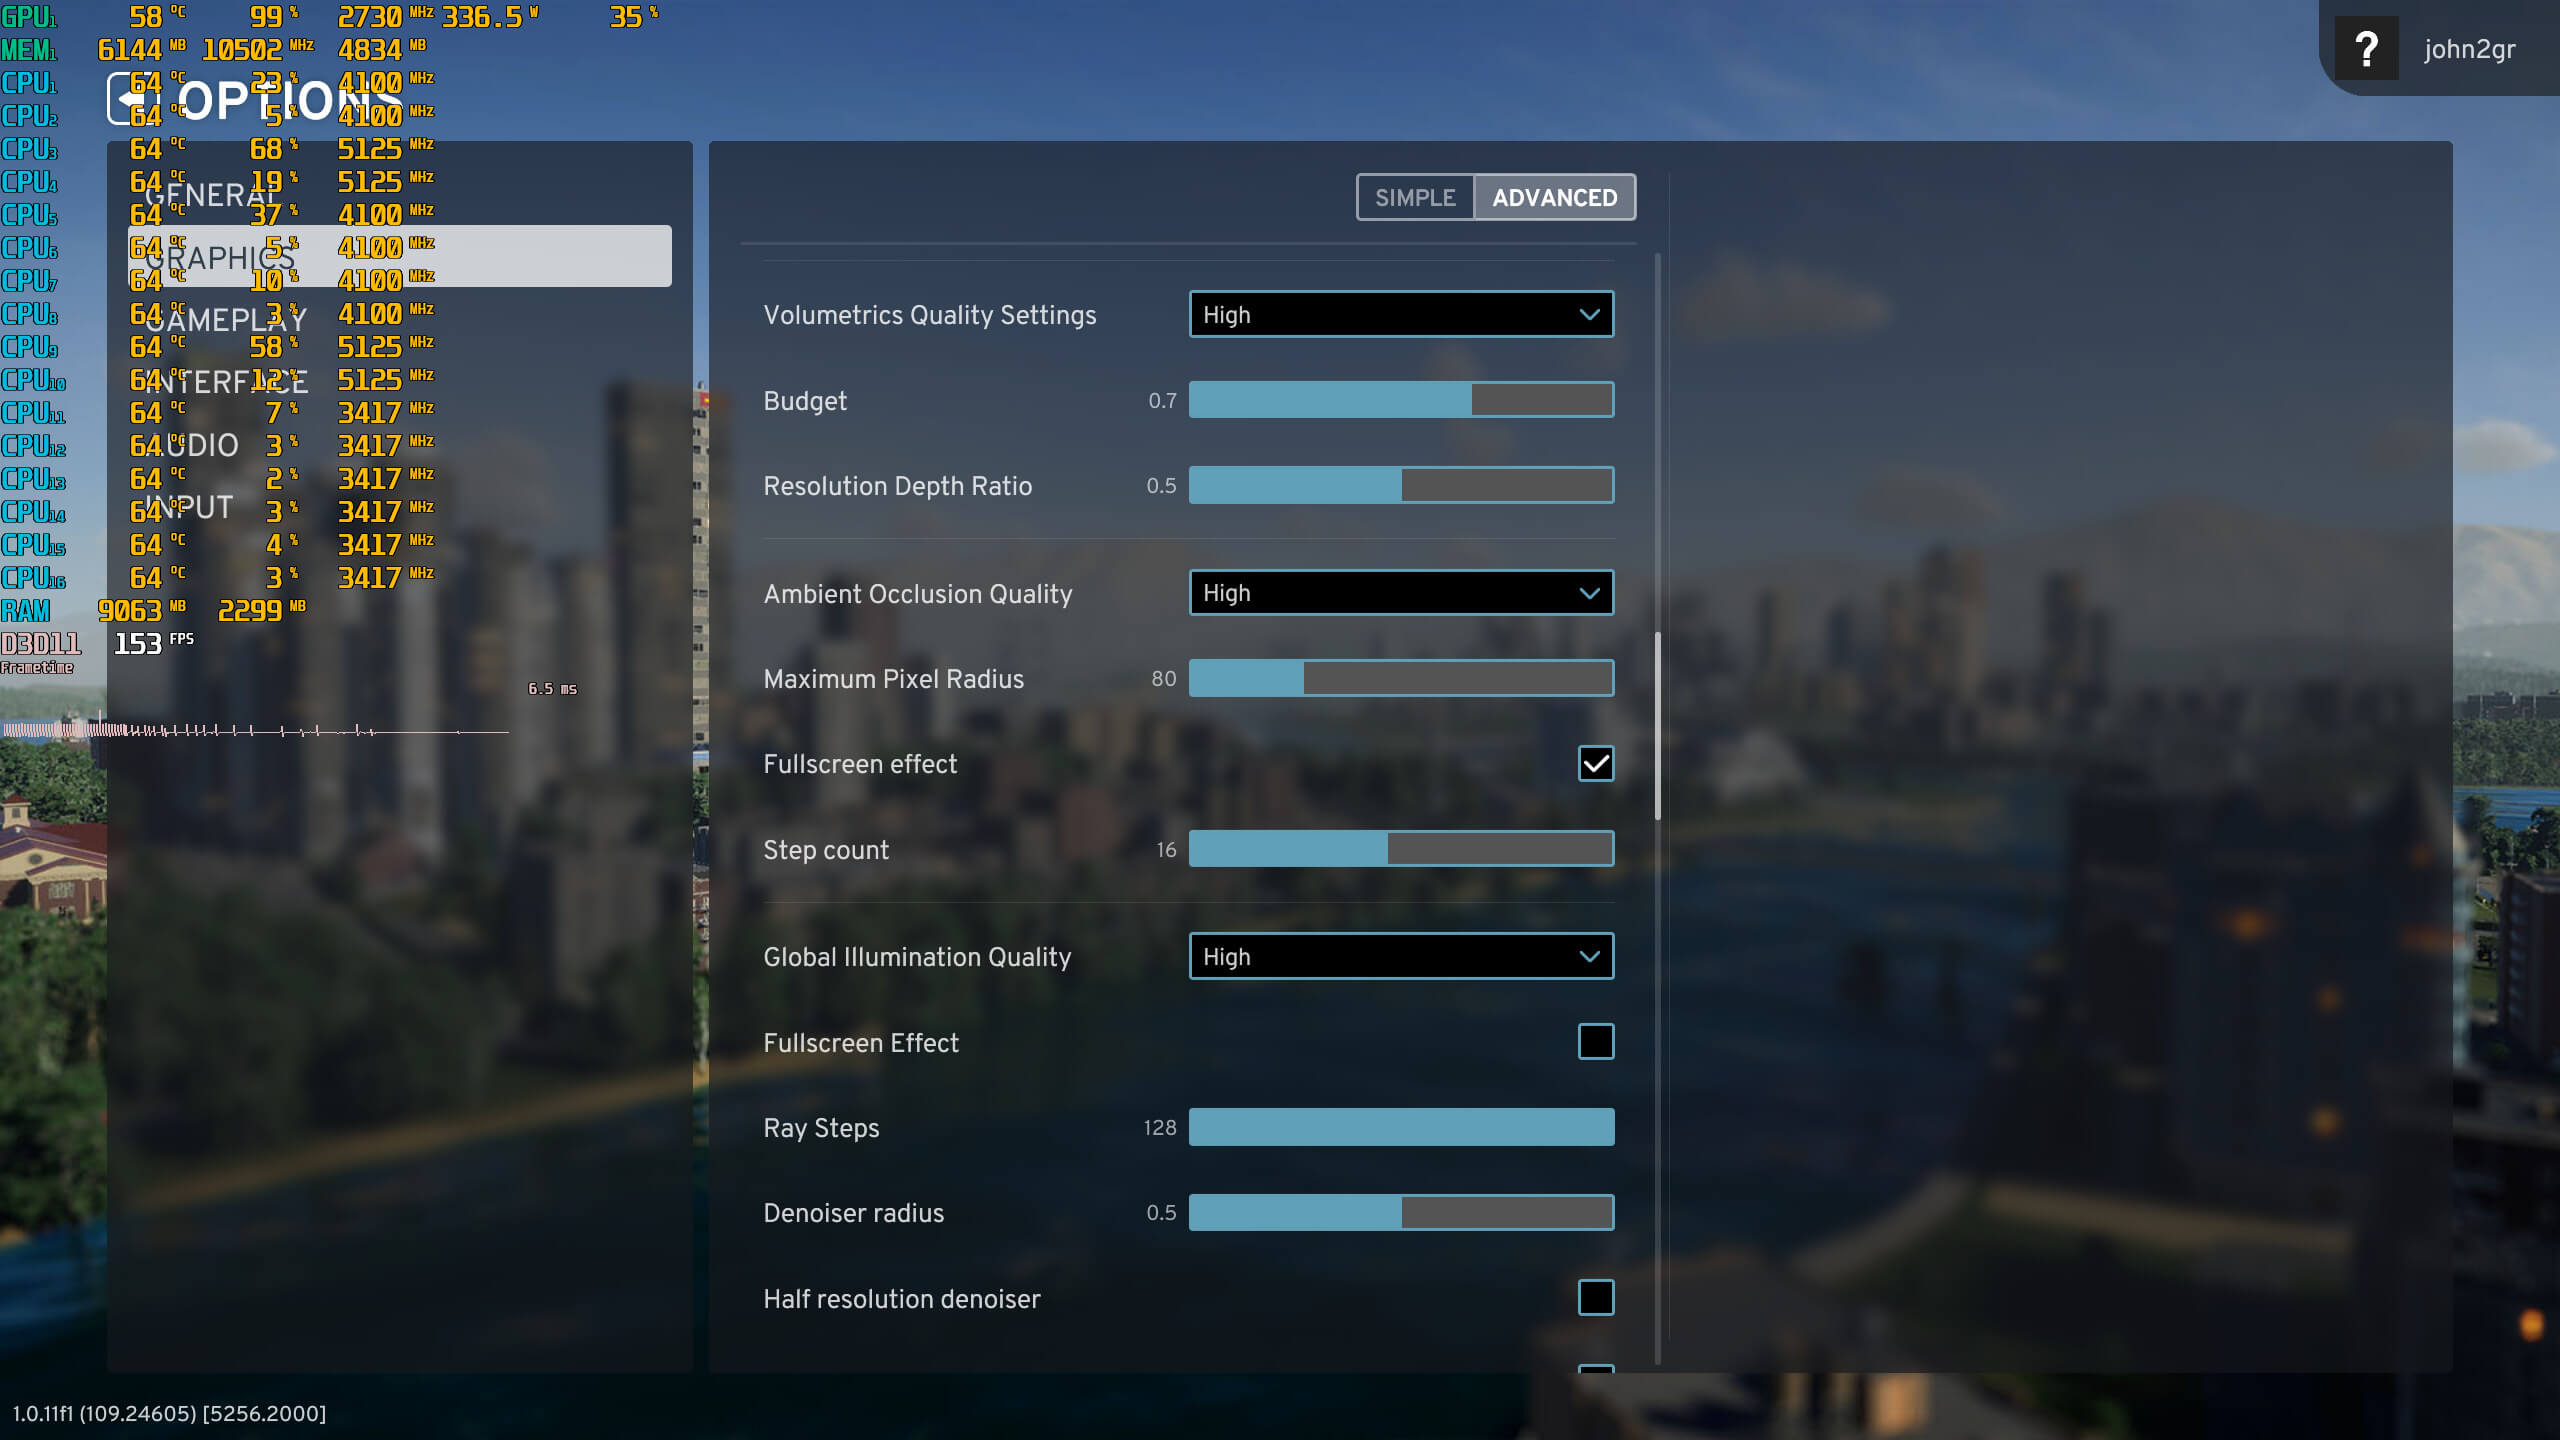 Cities Skylines 2 Benchmark and More Details - News